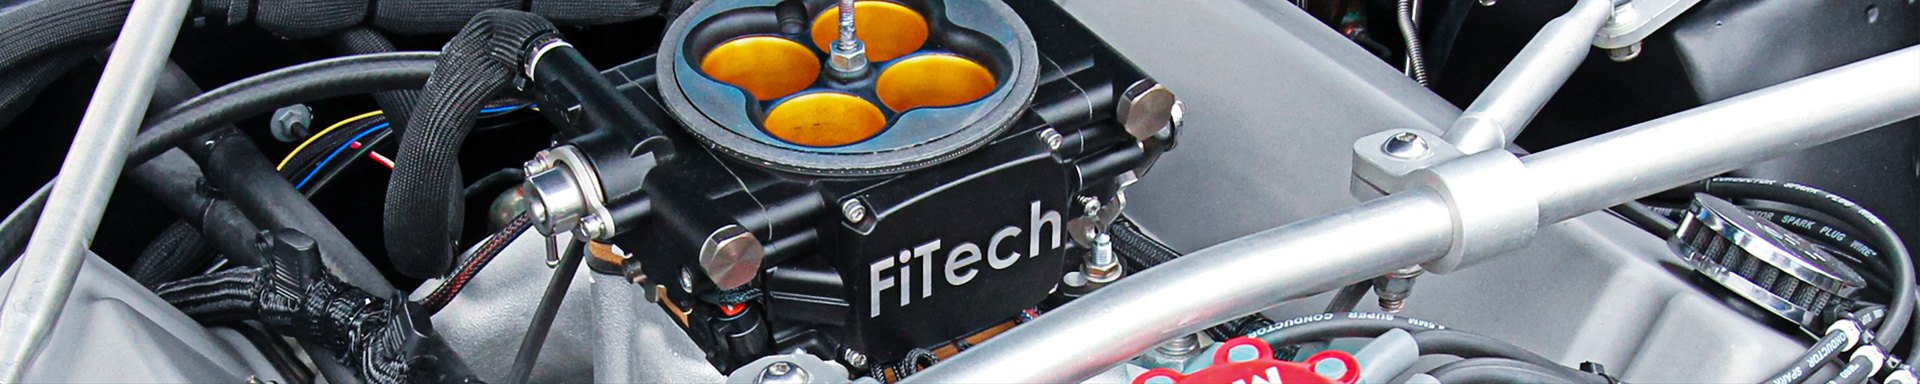 FiTech Fuel Delivery